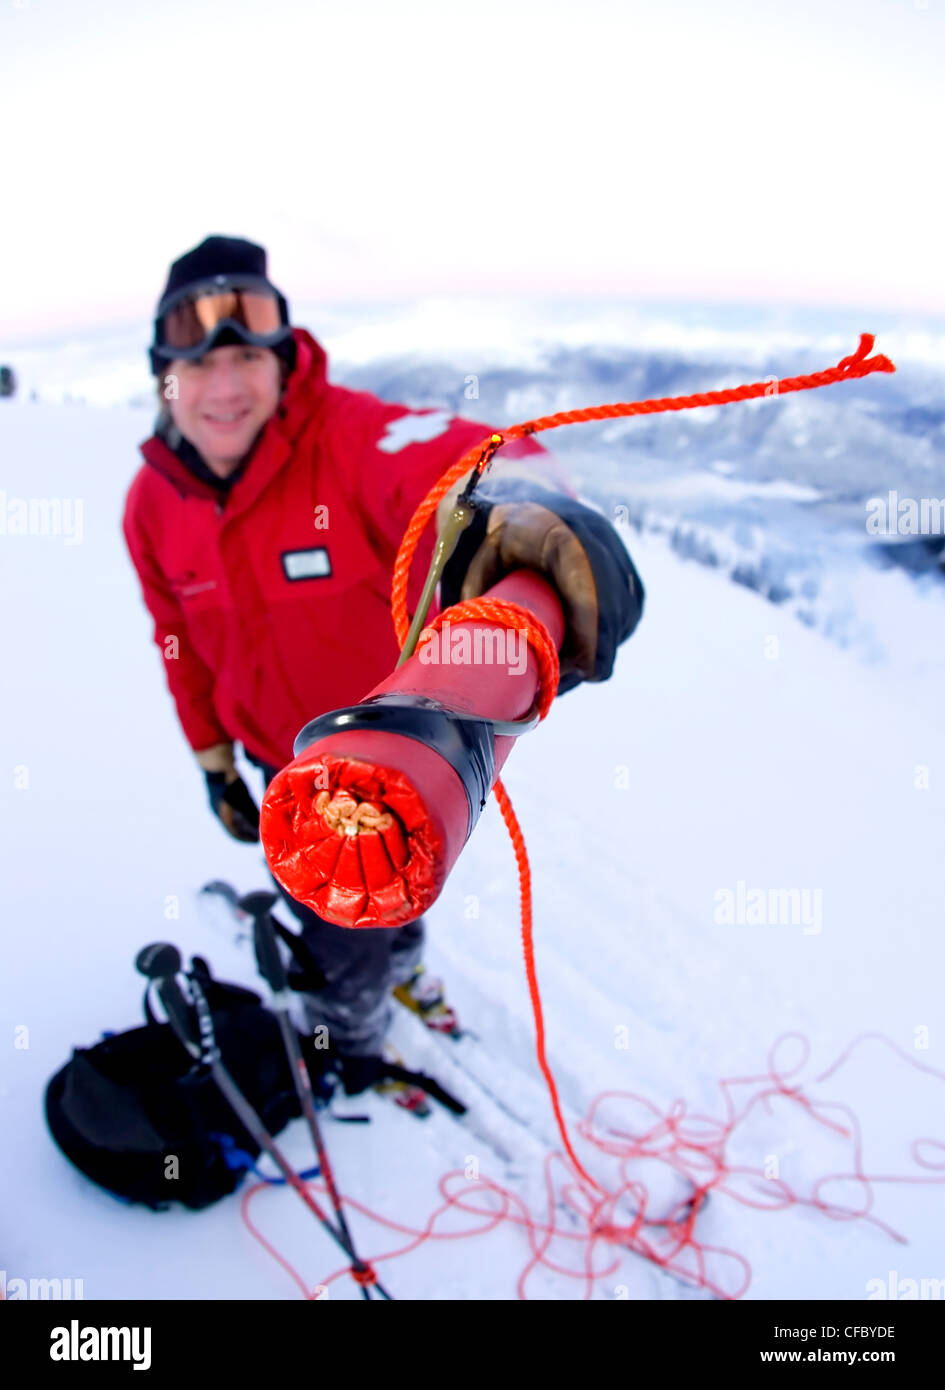 Man with explosives carrying out avalanche control, Blackcomb Mountain, Whistler, British Columbia, Canada Stock Photo